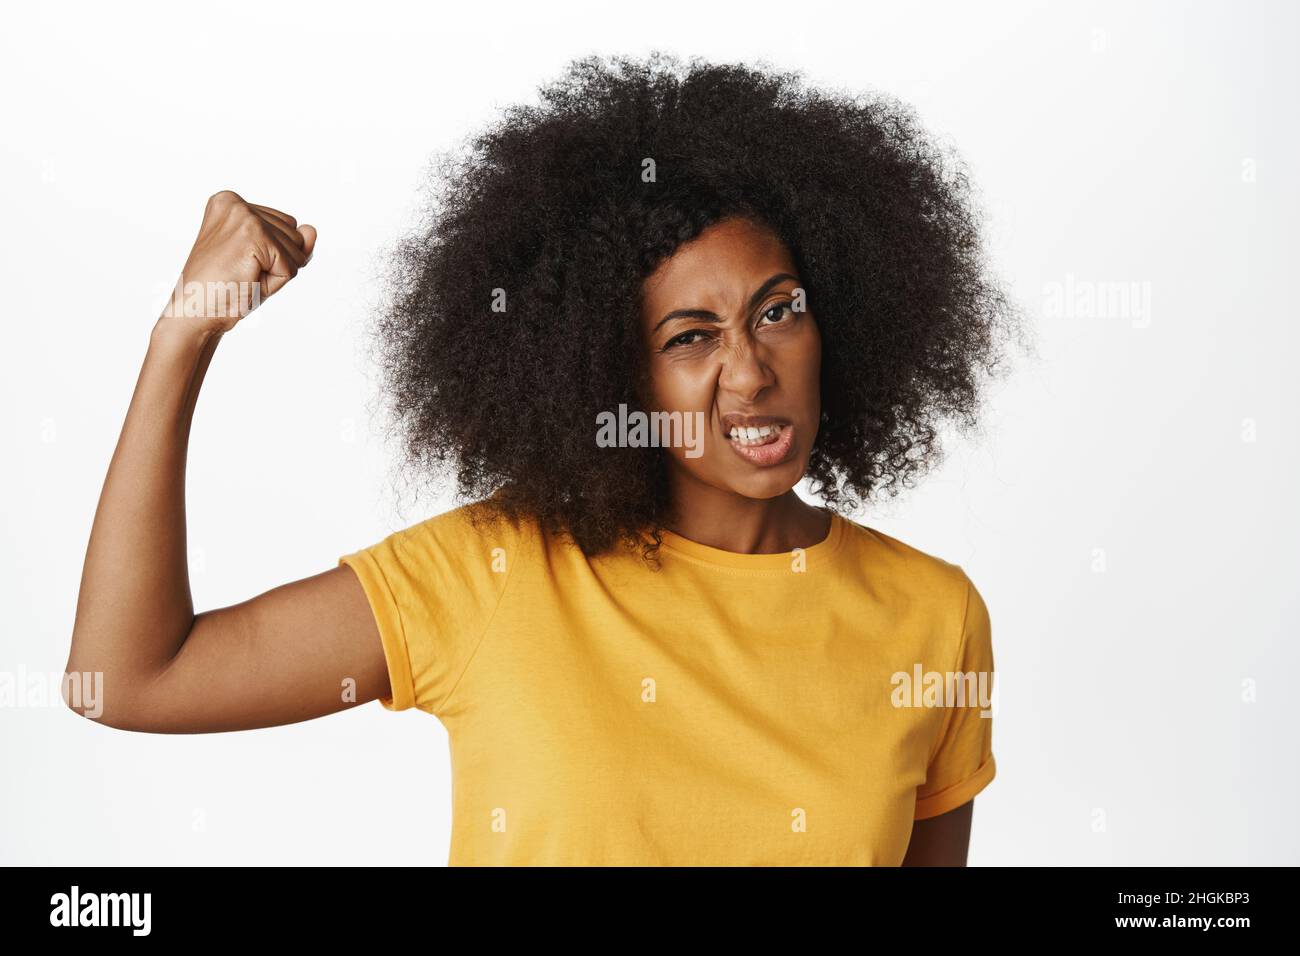 Women power. Strong and powerful african american woman flexing biceps and shows teeth fearless, brags her strengths, standing over white background Stock Photo